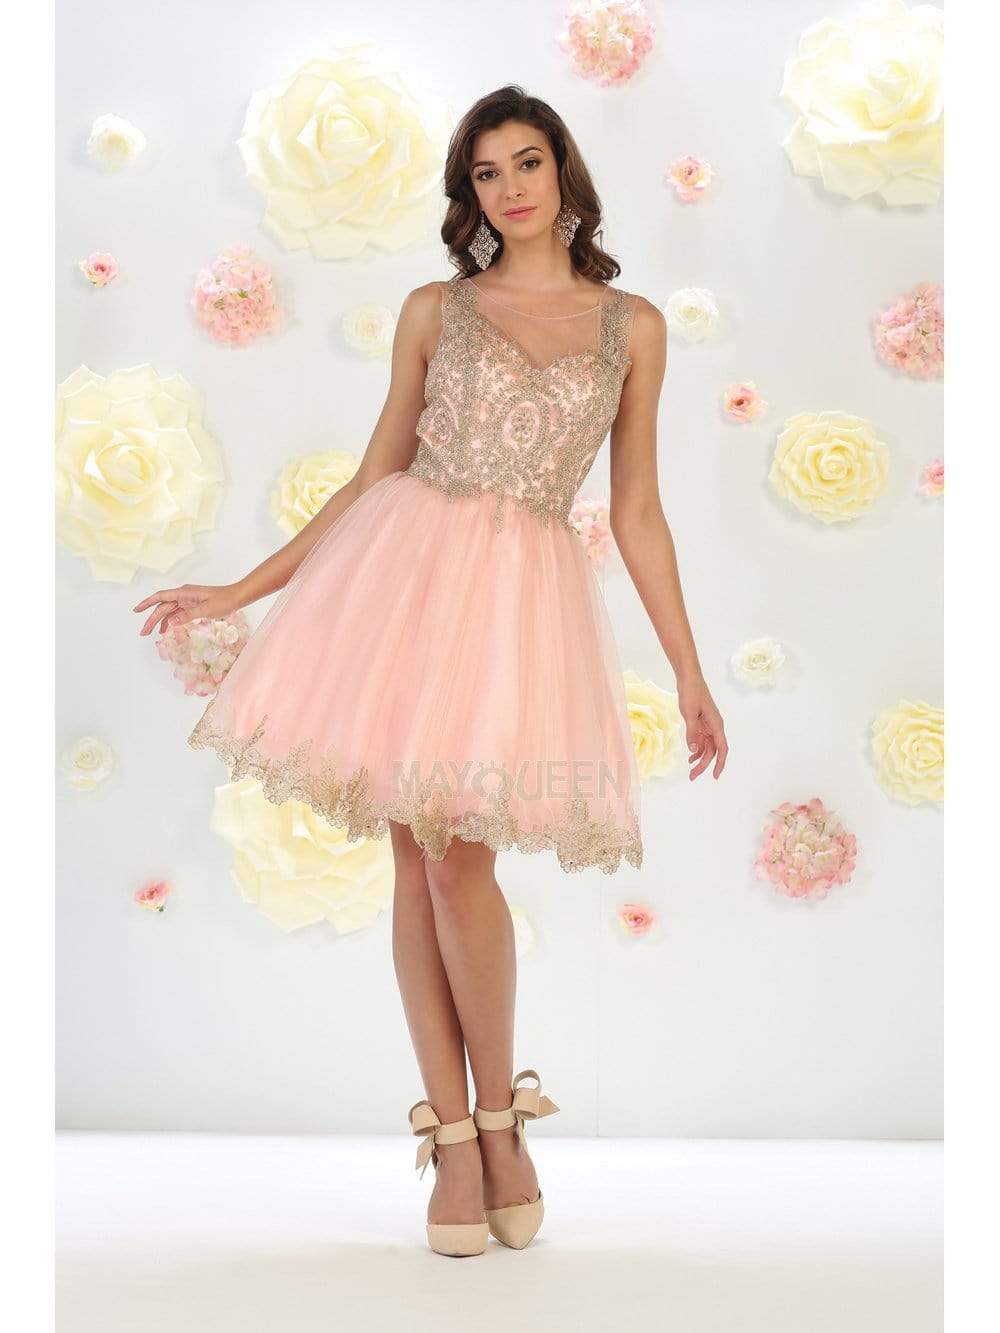 May Queen - MQ1434 Illusion Neckline Lace Applique Cocktail Dress Homecoming Dresses 2 / Blush